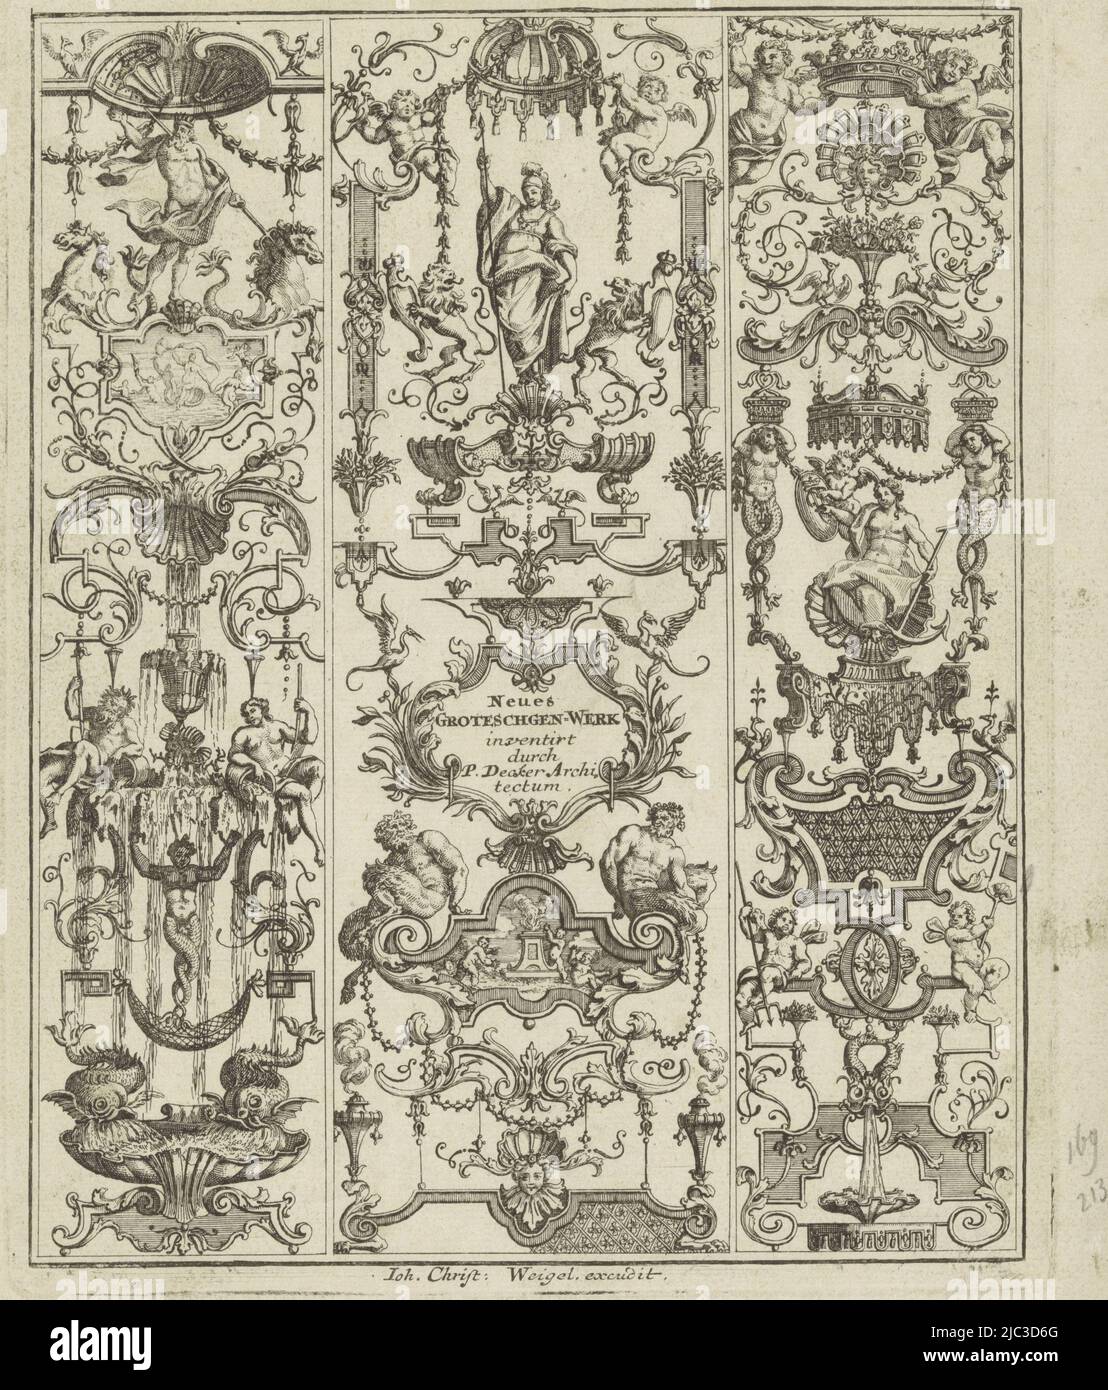 Three pilasters with grotesques and various mythical figures and scenes, Grotesque with Neptune and Minerva Neues Groteschgen-Werk (series title on object), print maker: Johann Adam Delsenbach, (possibly), Paul Decker (I), (mentioned on object), publisher: Johann Christoph Weigel, (mentioned on object), Neurenberg, 1700 - 1725, paper, etching, h 220 mm × w 176 mm Stock Photo